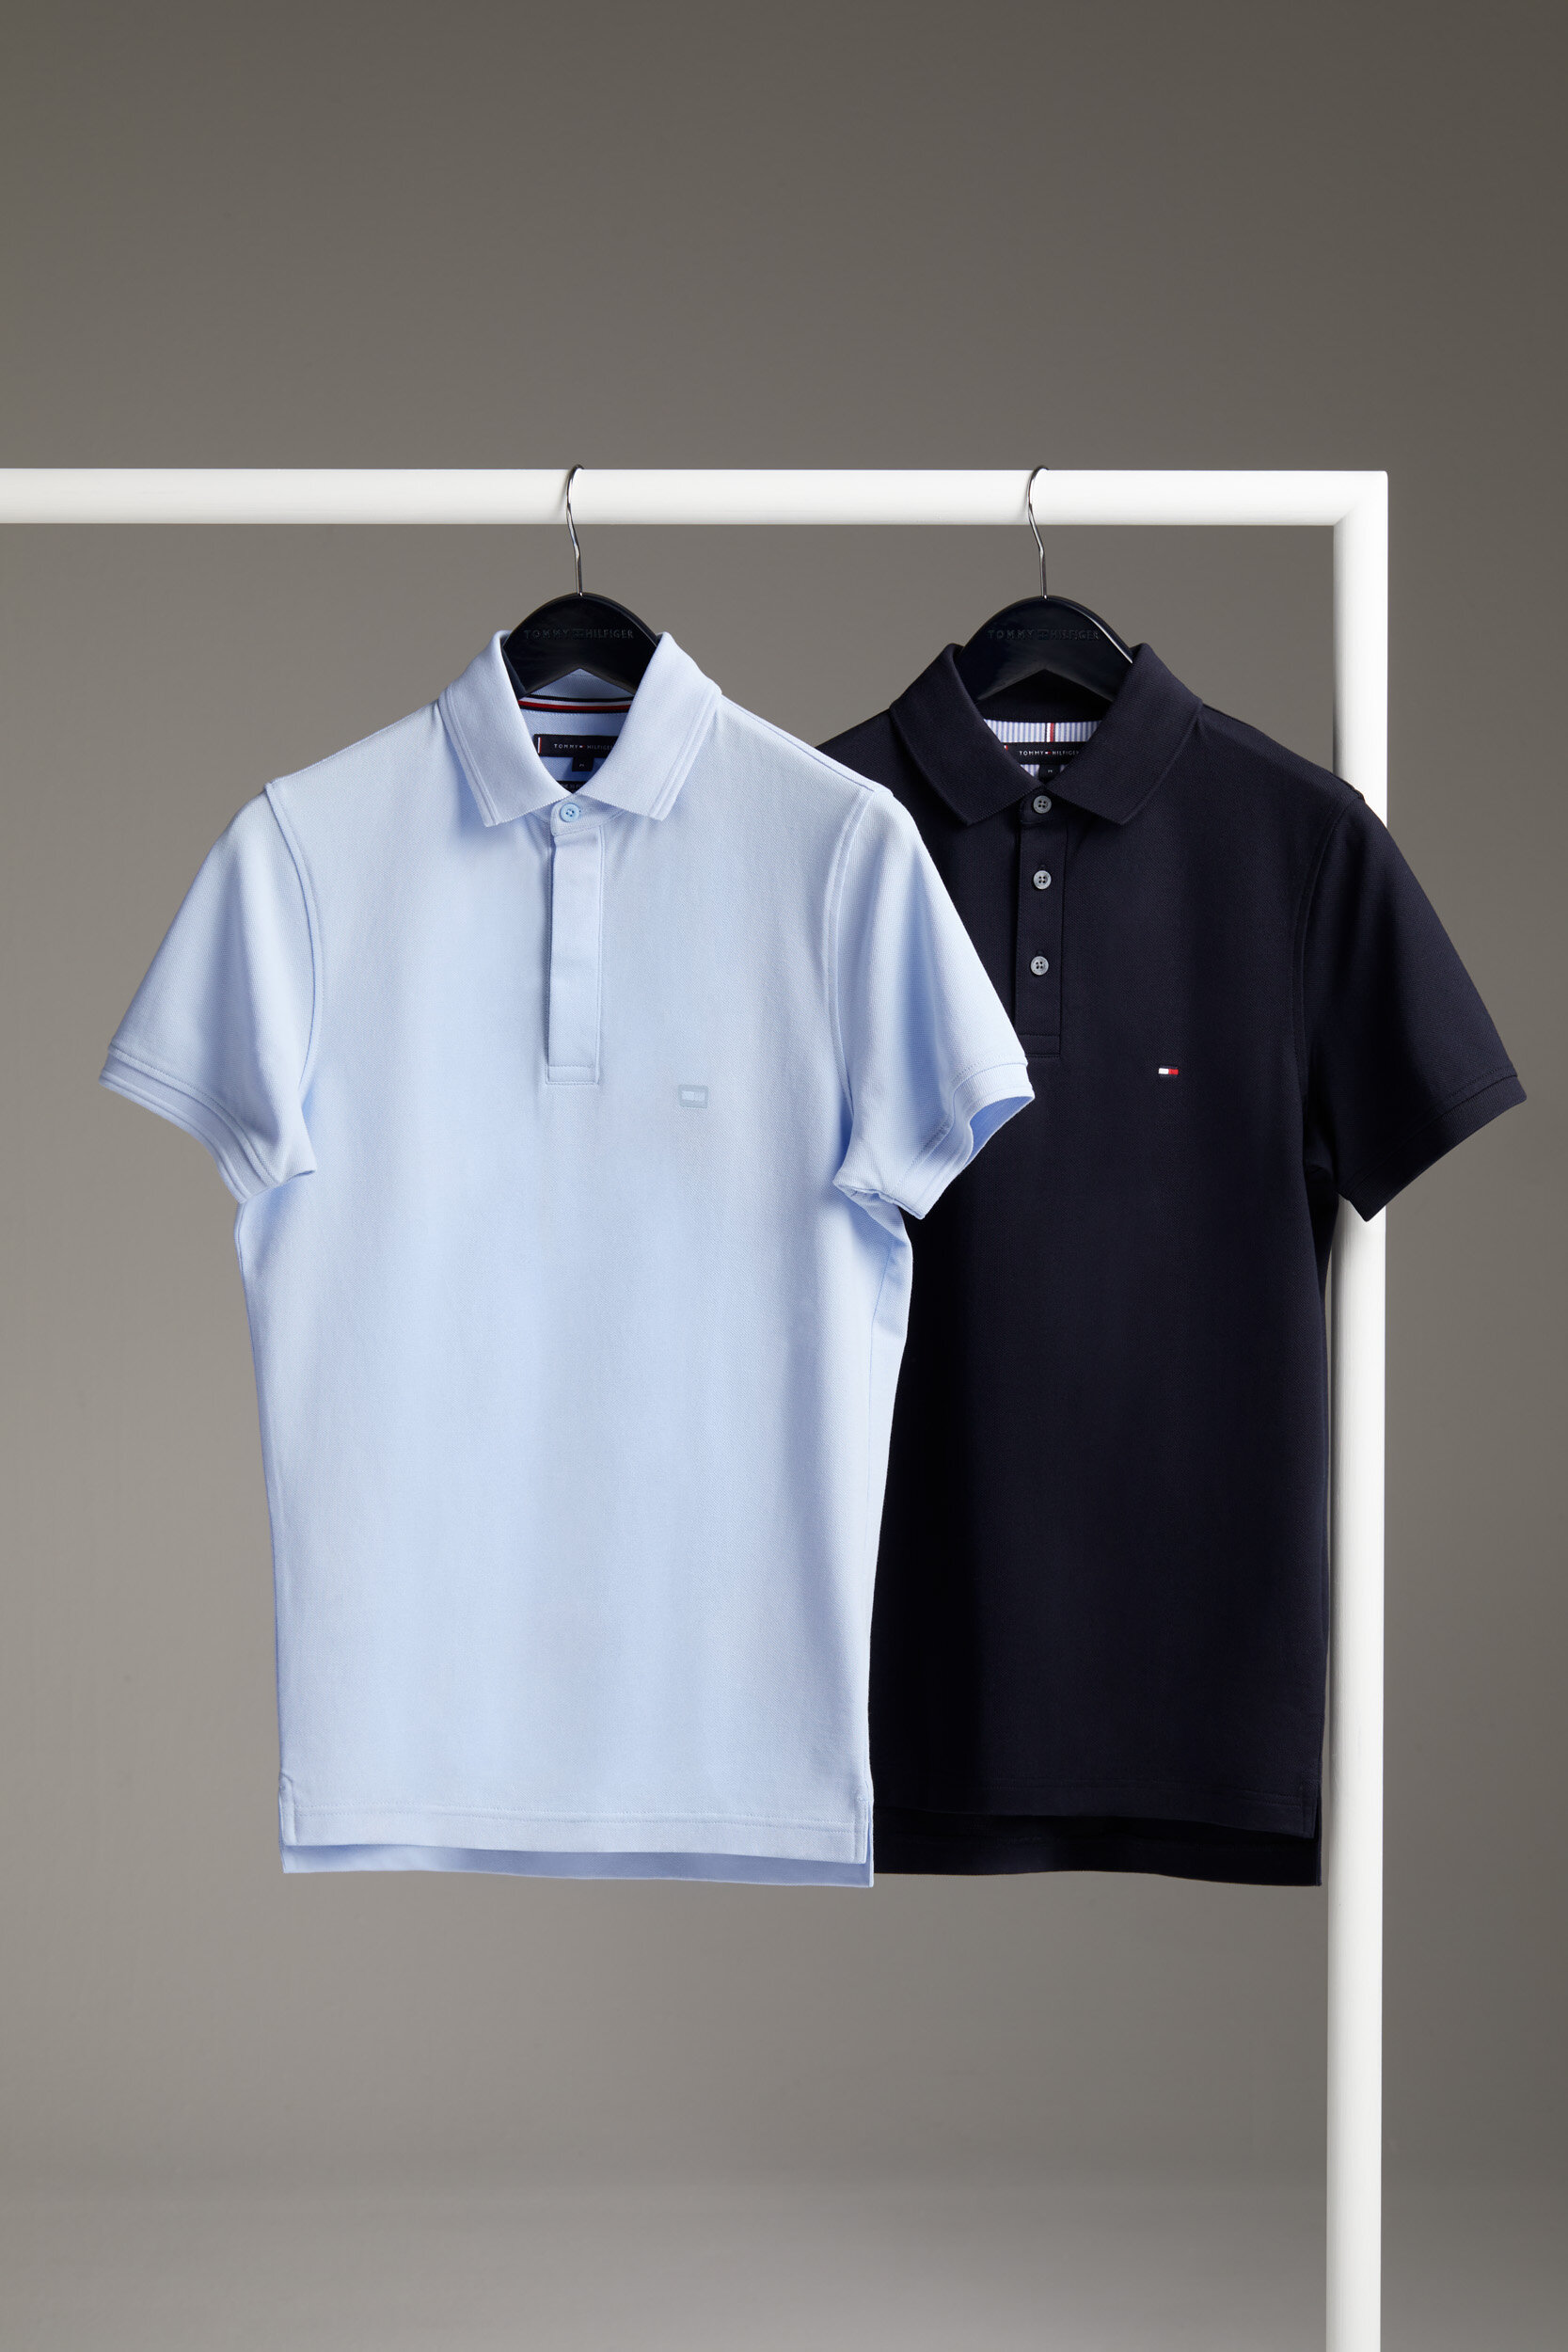 Tommy Hilfiger Spring 2021 Menswear - The 1985 Polo — SSI Life